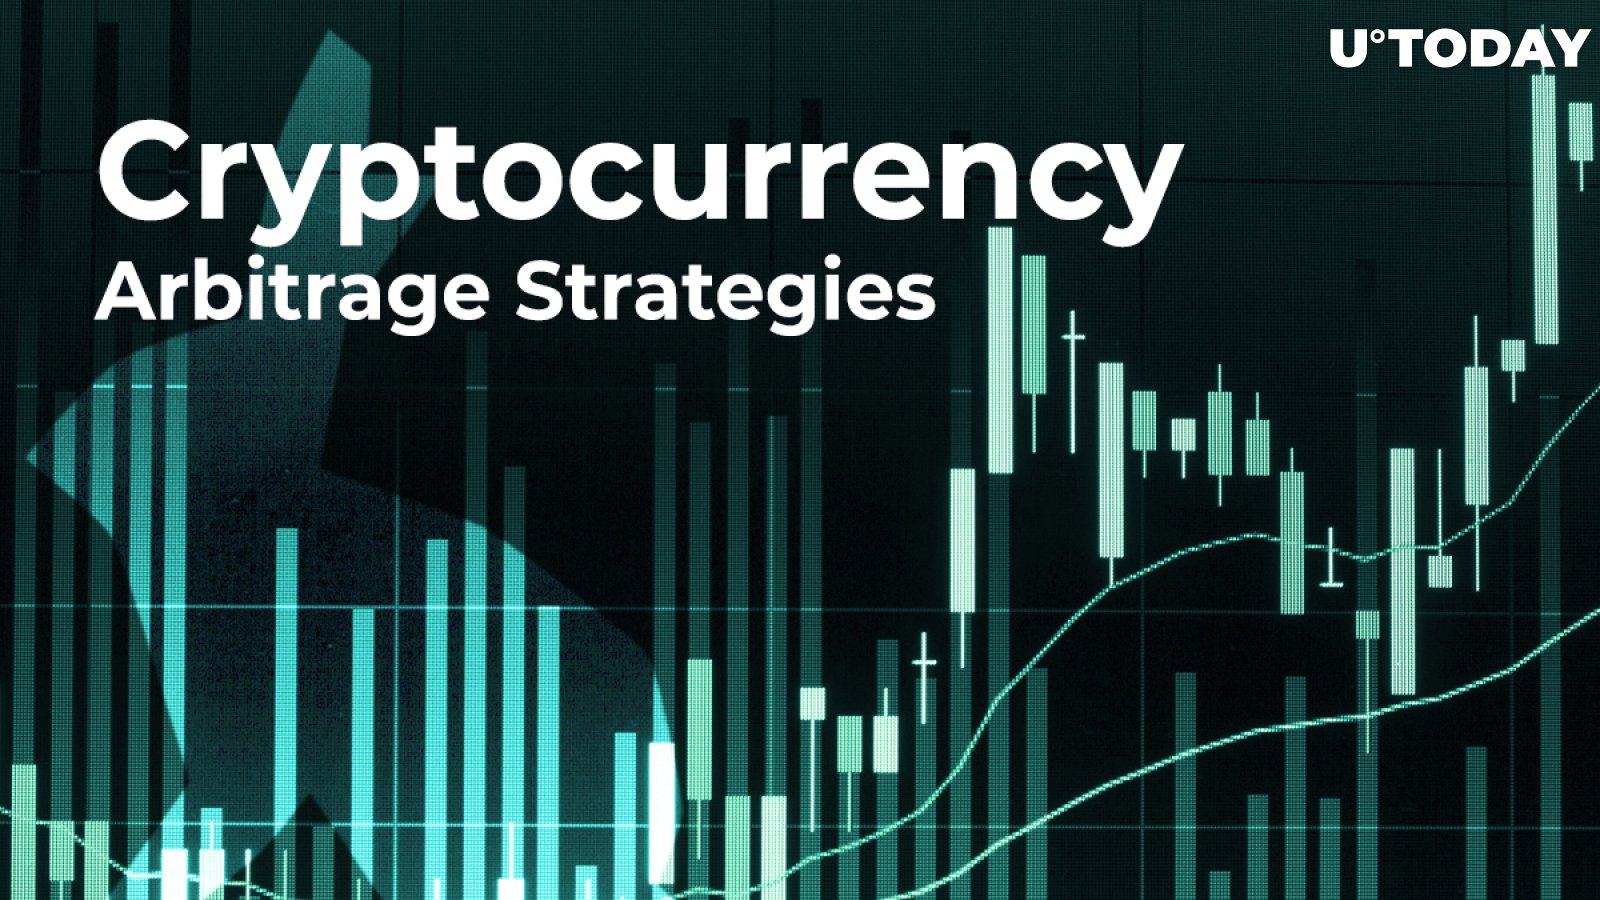 Cryptocurrency Arbitrage Strategies: How To Reap Maximum Benefit From Trading?